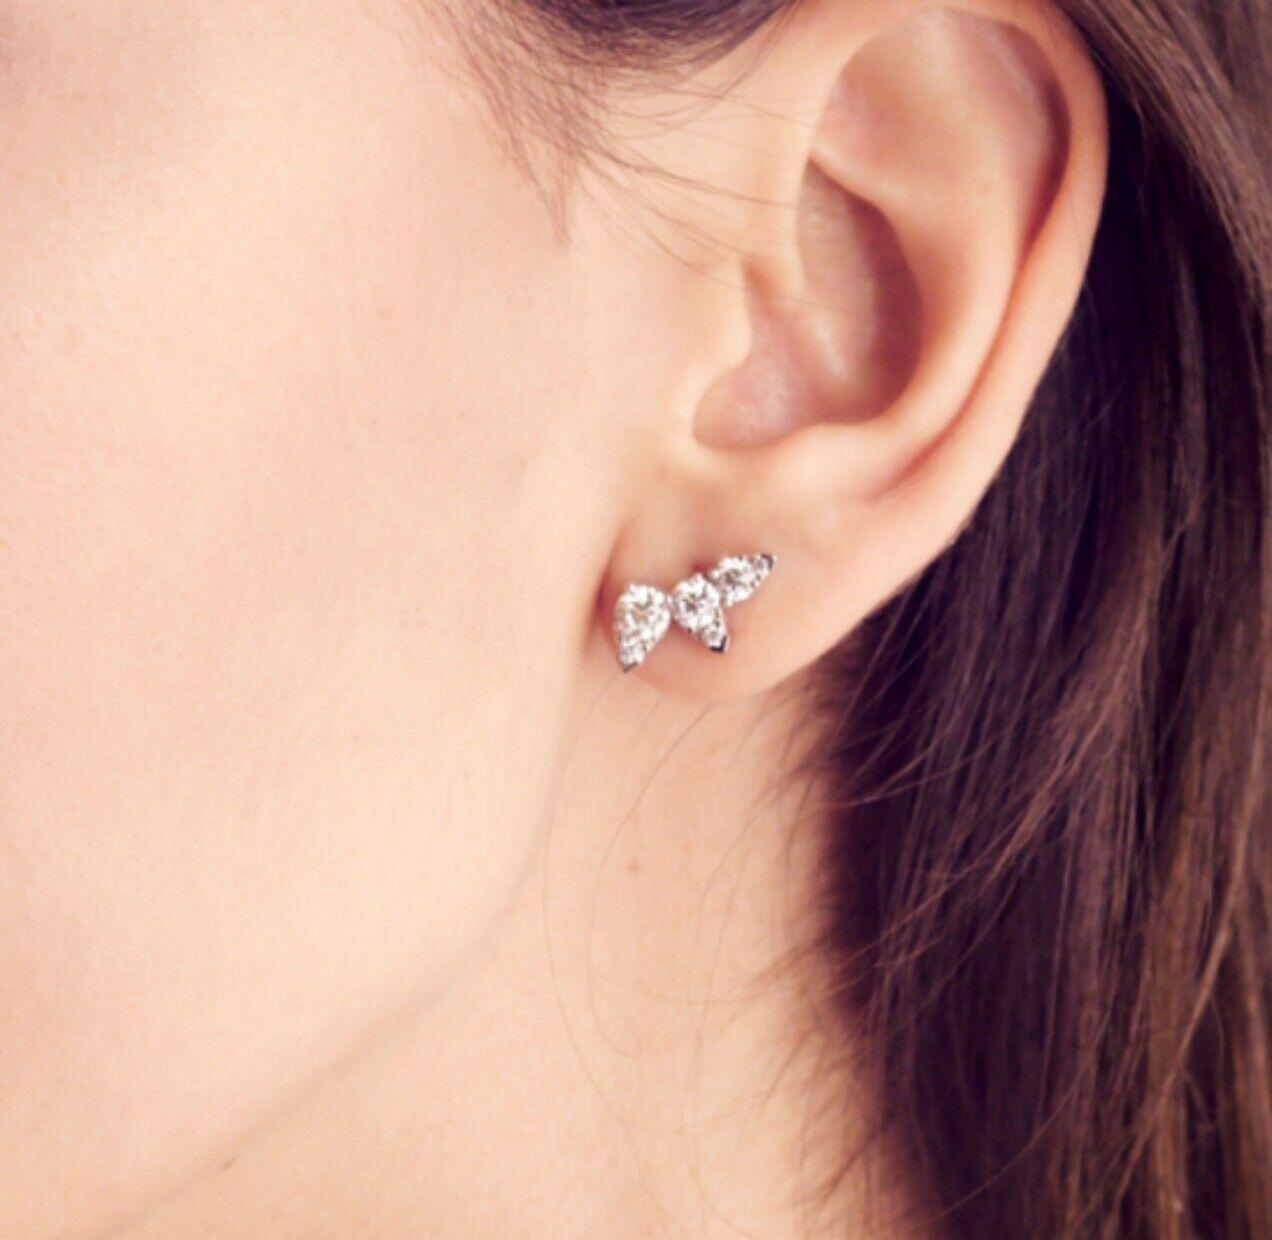 You are viewing a Beautiful Pair of Hearts on Fire Ear Vine Diamond Earrings. Chic, bold and fashion forward design that makes these the perfect every day earrings with a little character!!
These earrings are crafted from 18k white gold. Each